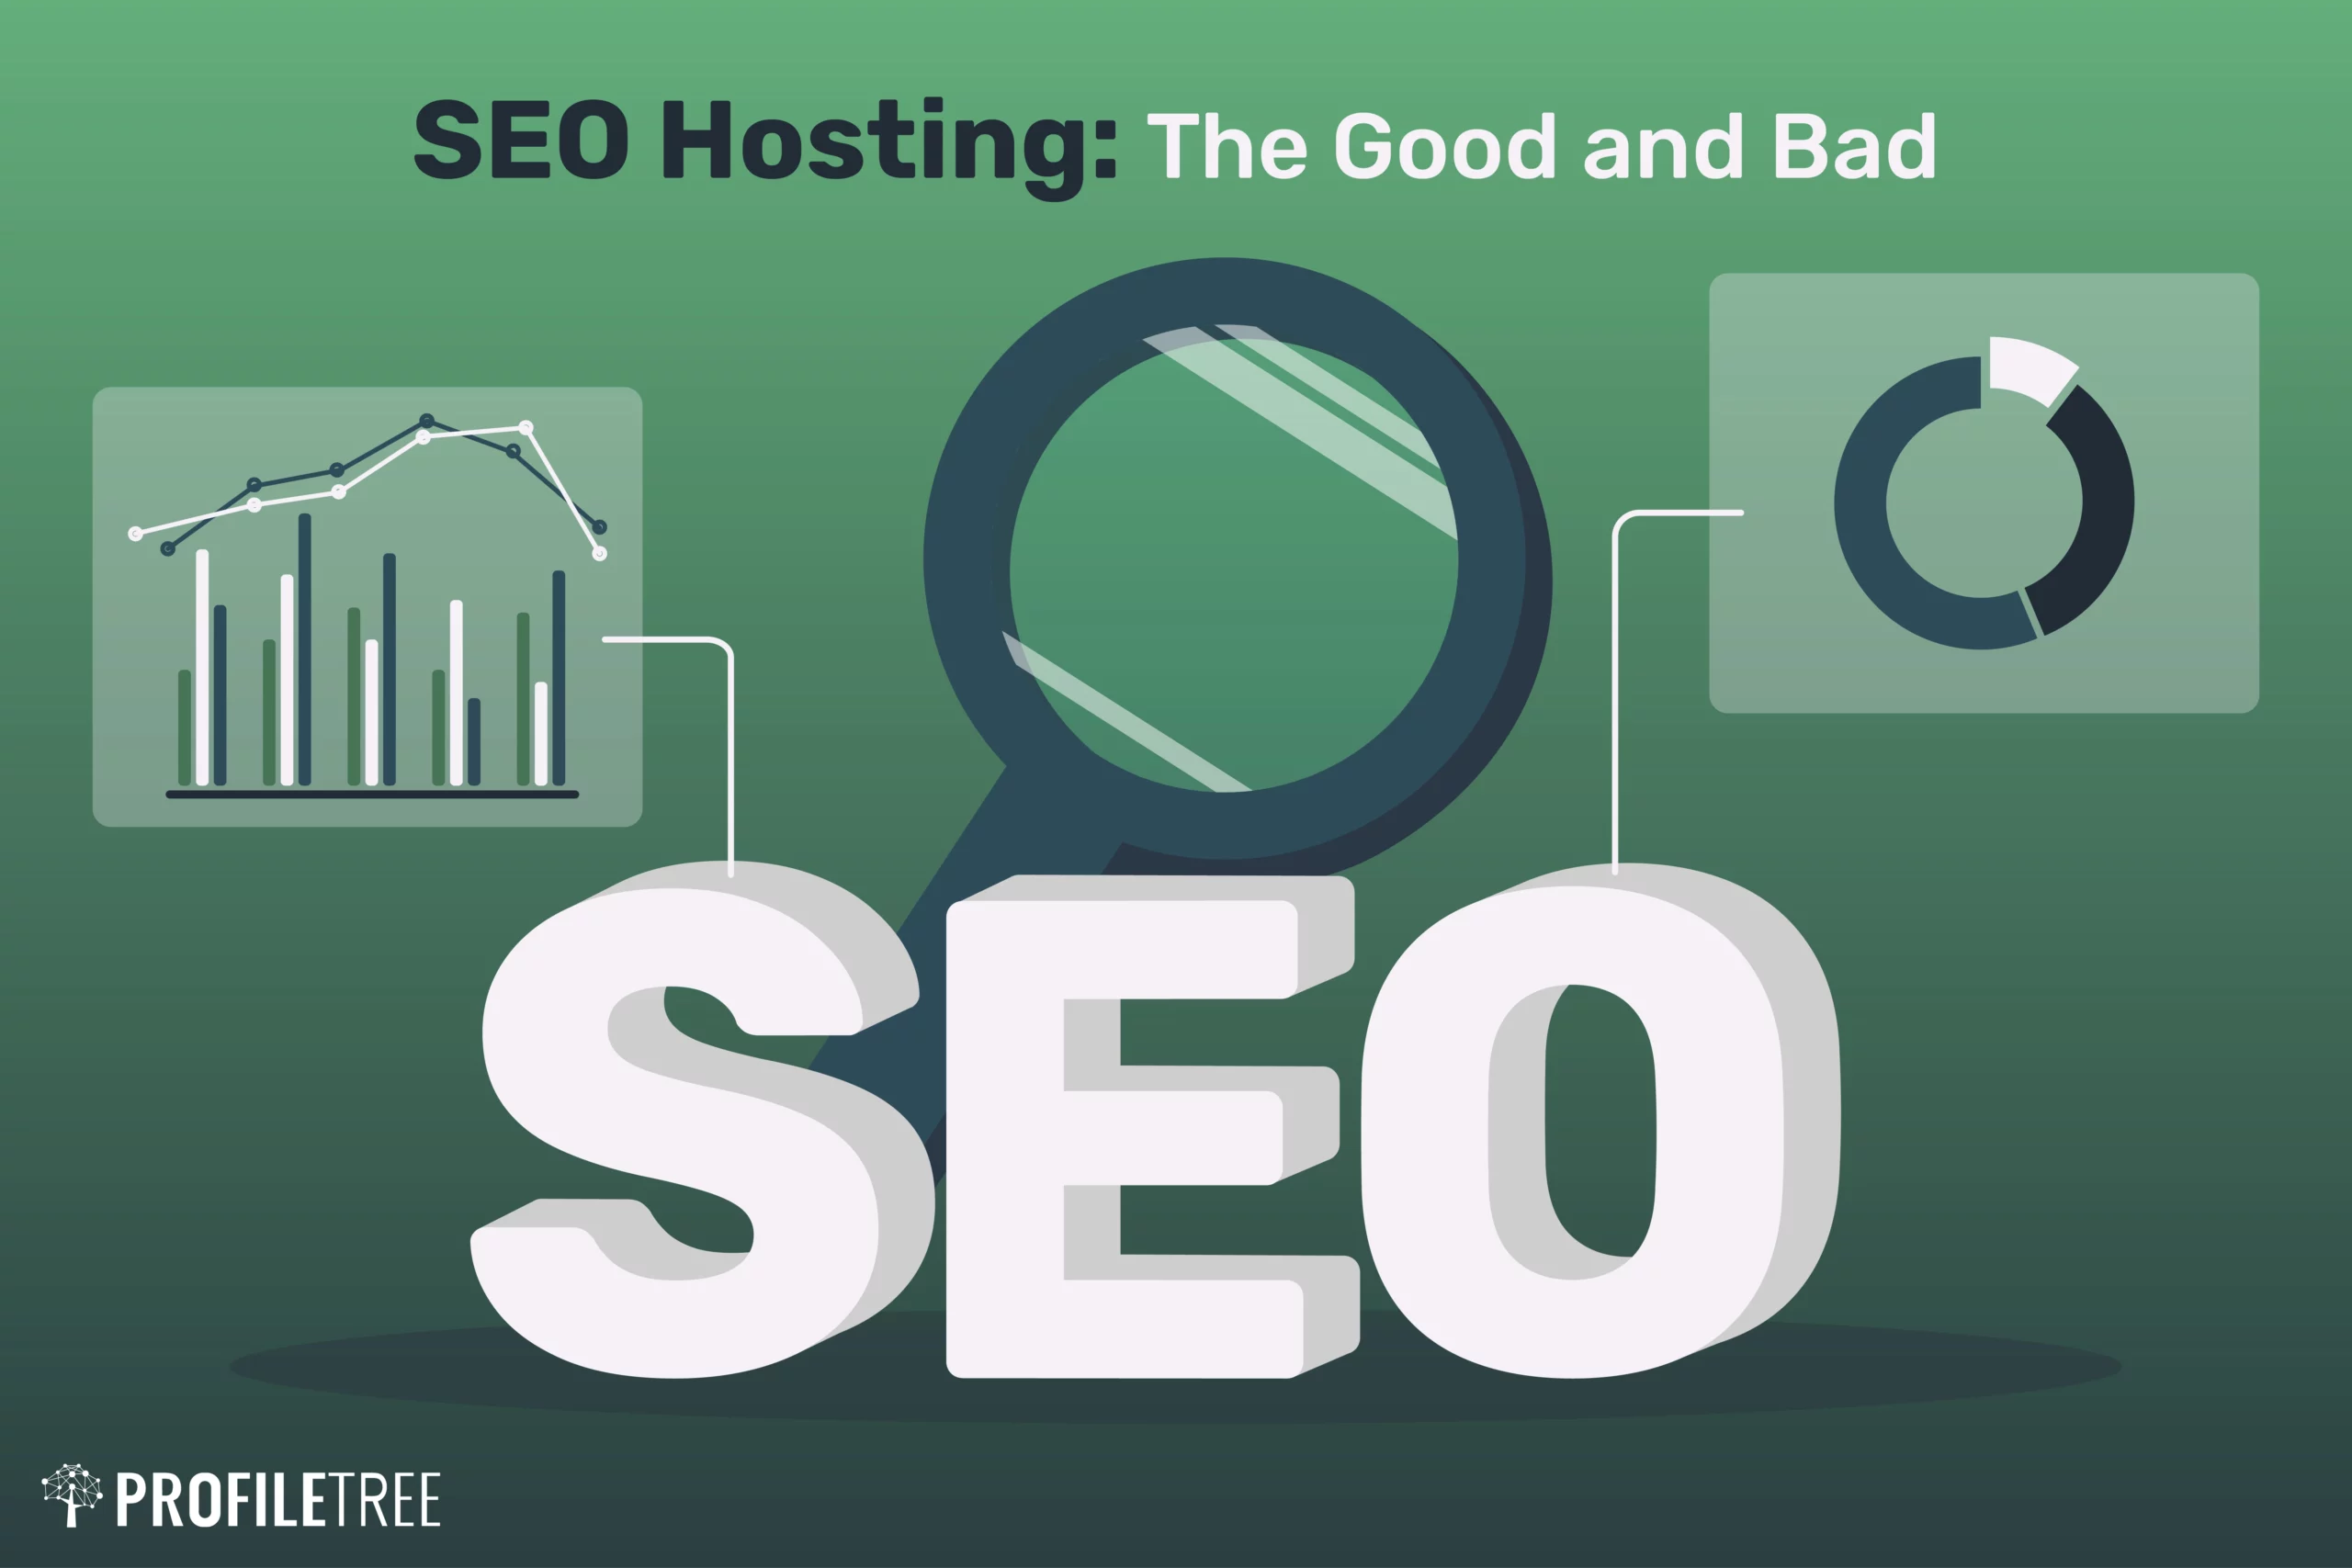 SEO Hosting The Good and Bad